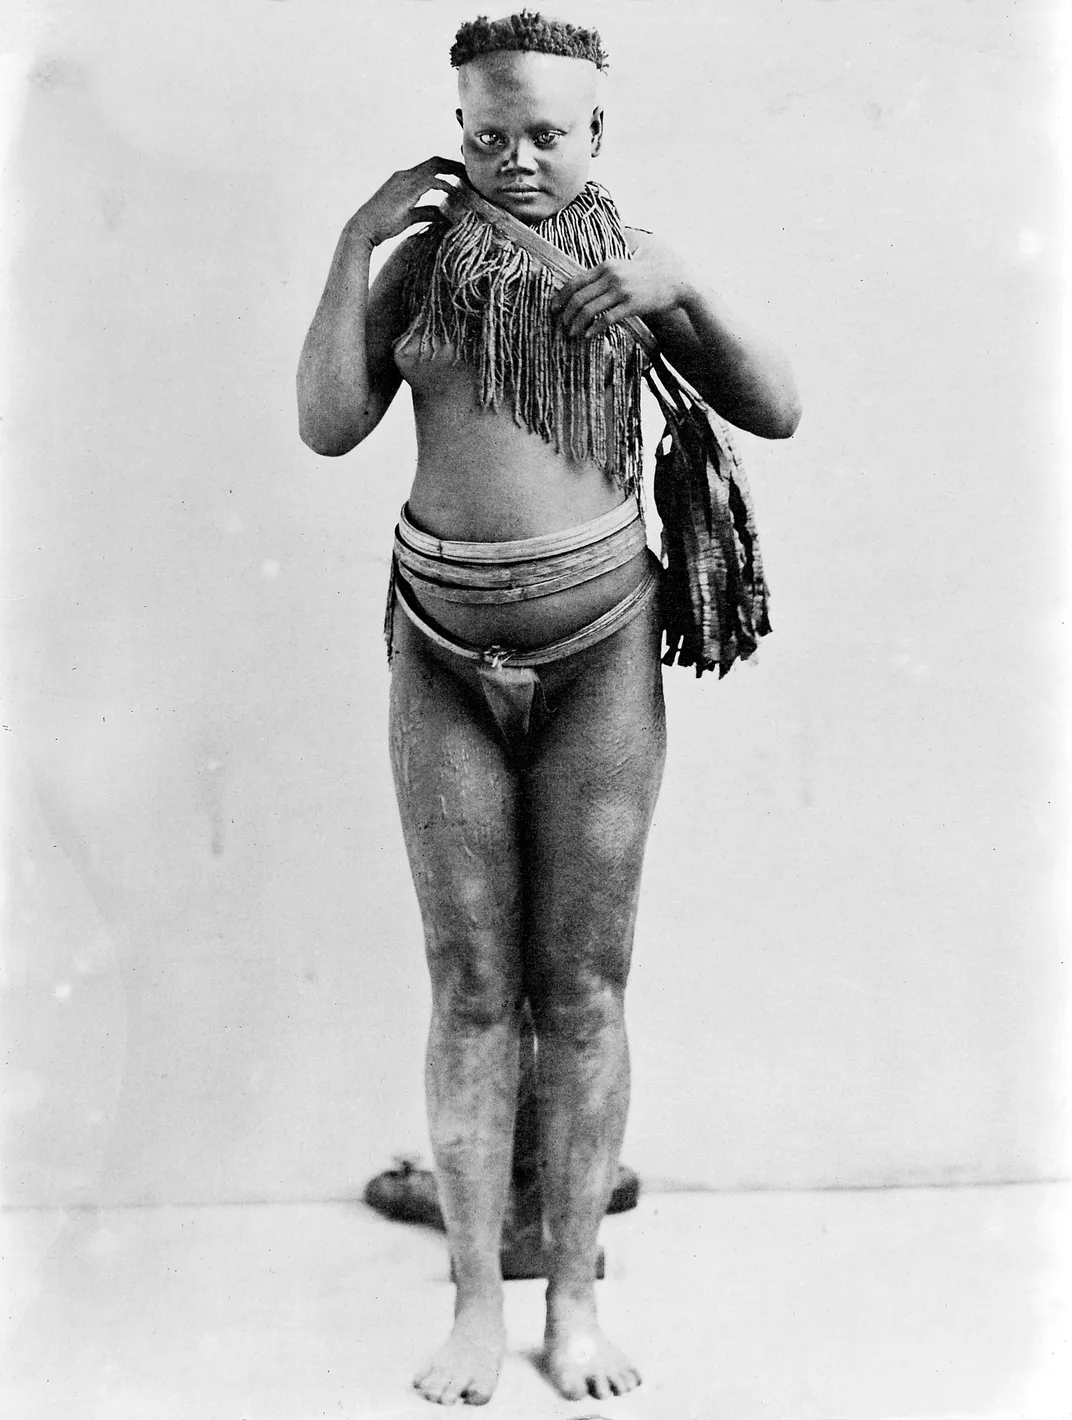 A 1938 photo of a young girl from the Andaman Islands